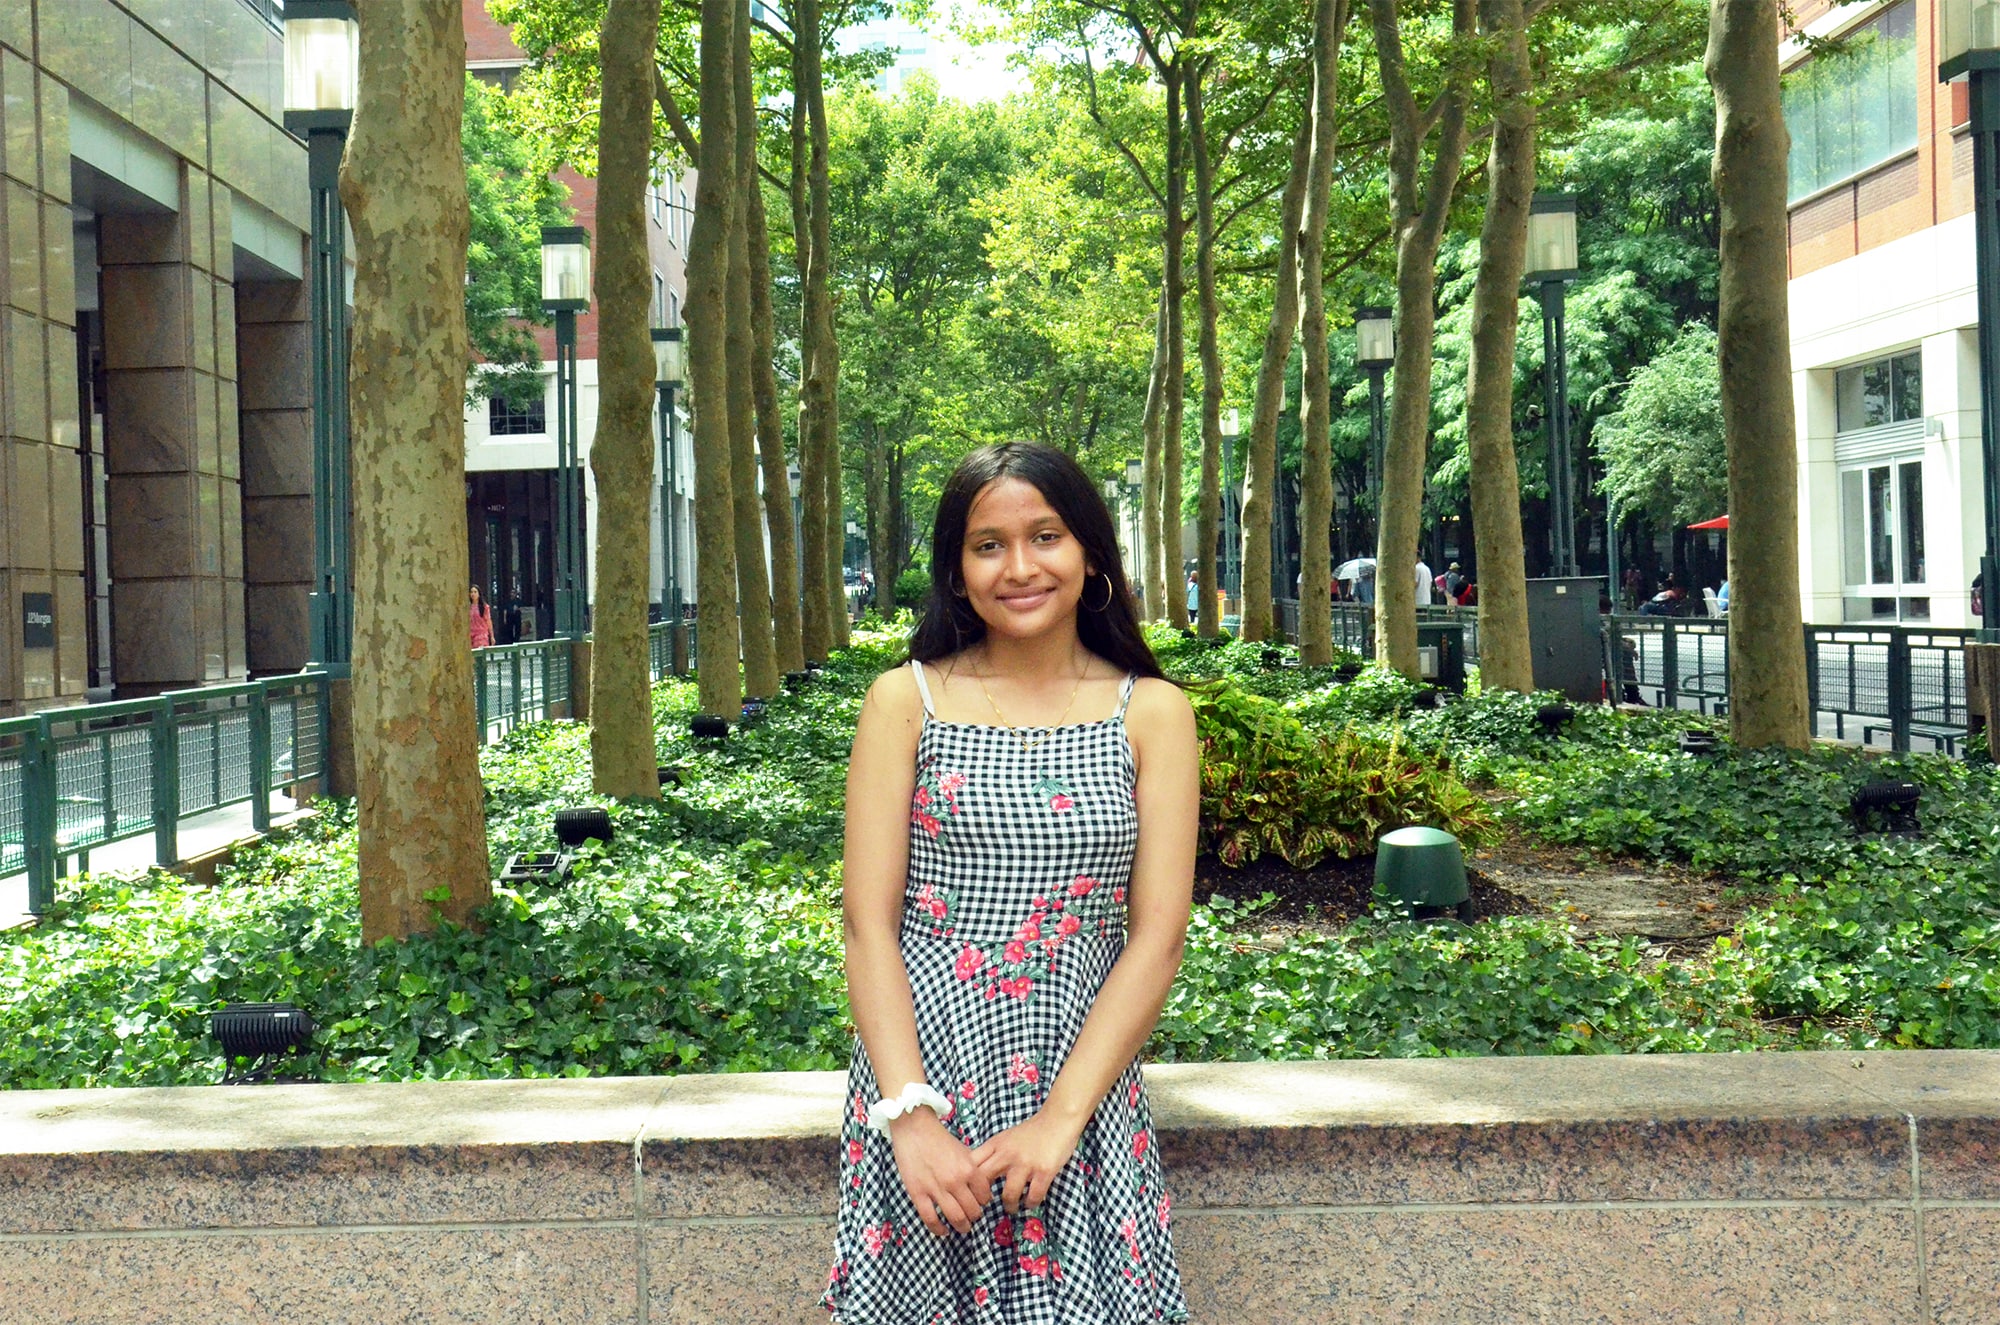 A teenager wearing a checked dress poses in front of a row of trees at Metrotech Center in Brooklyn